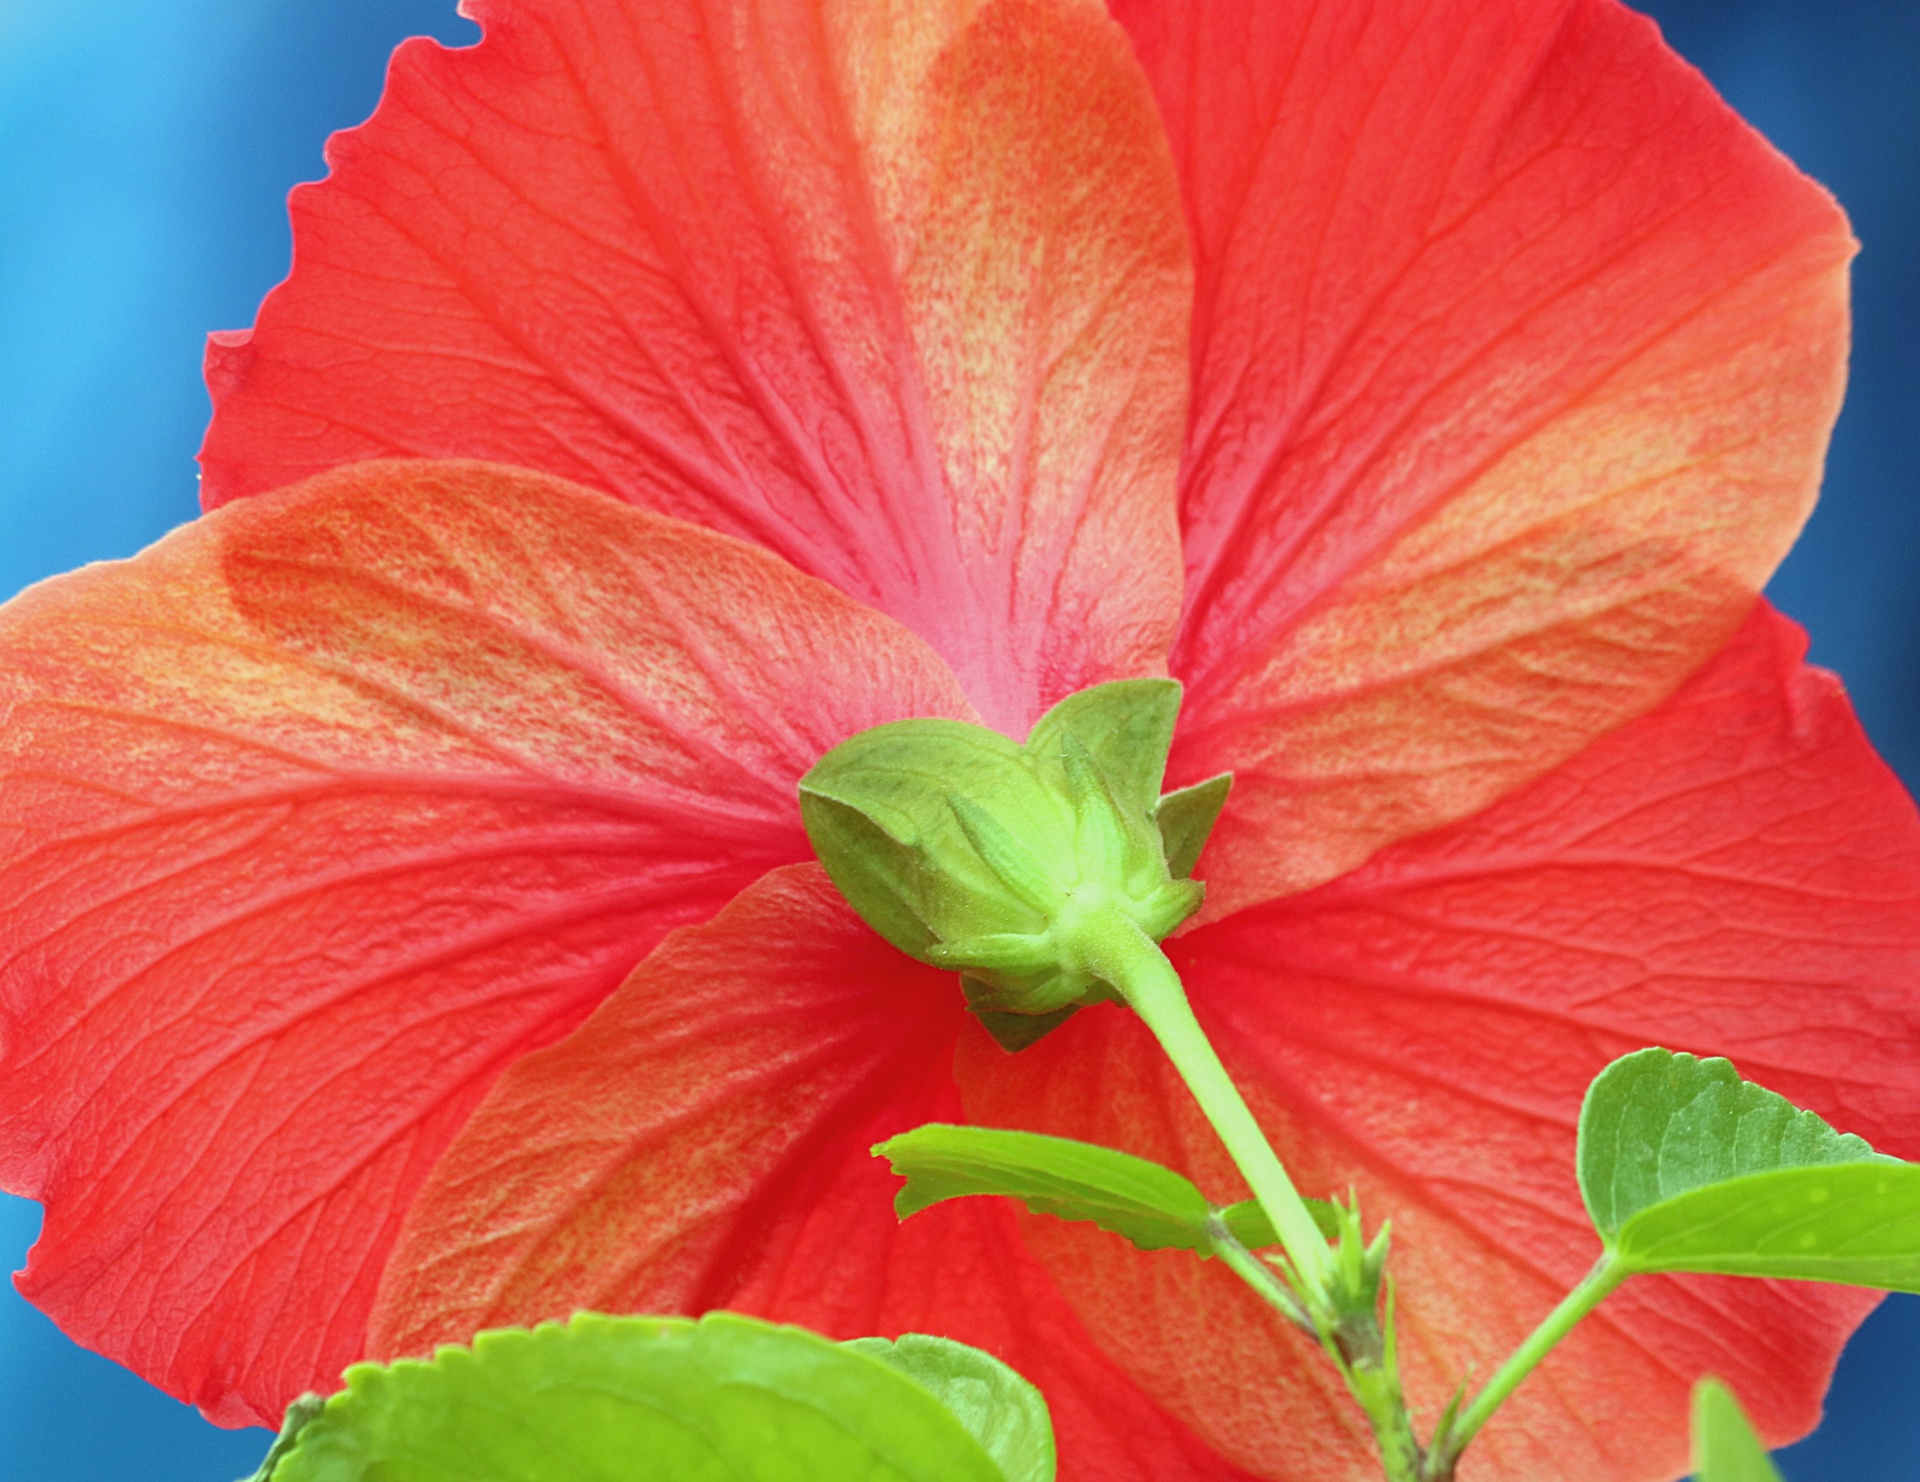 Behind A Red Hibiscus Close-up